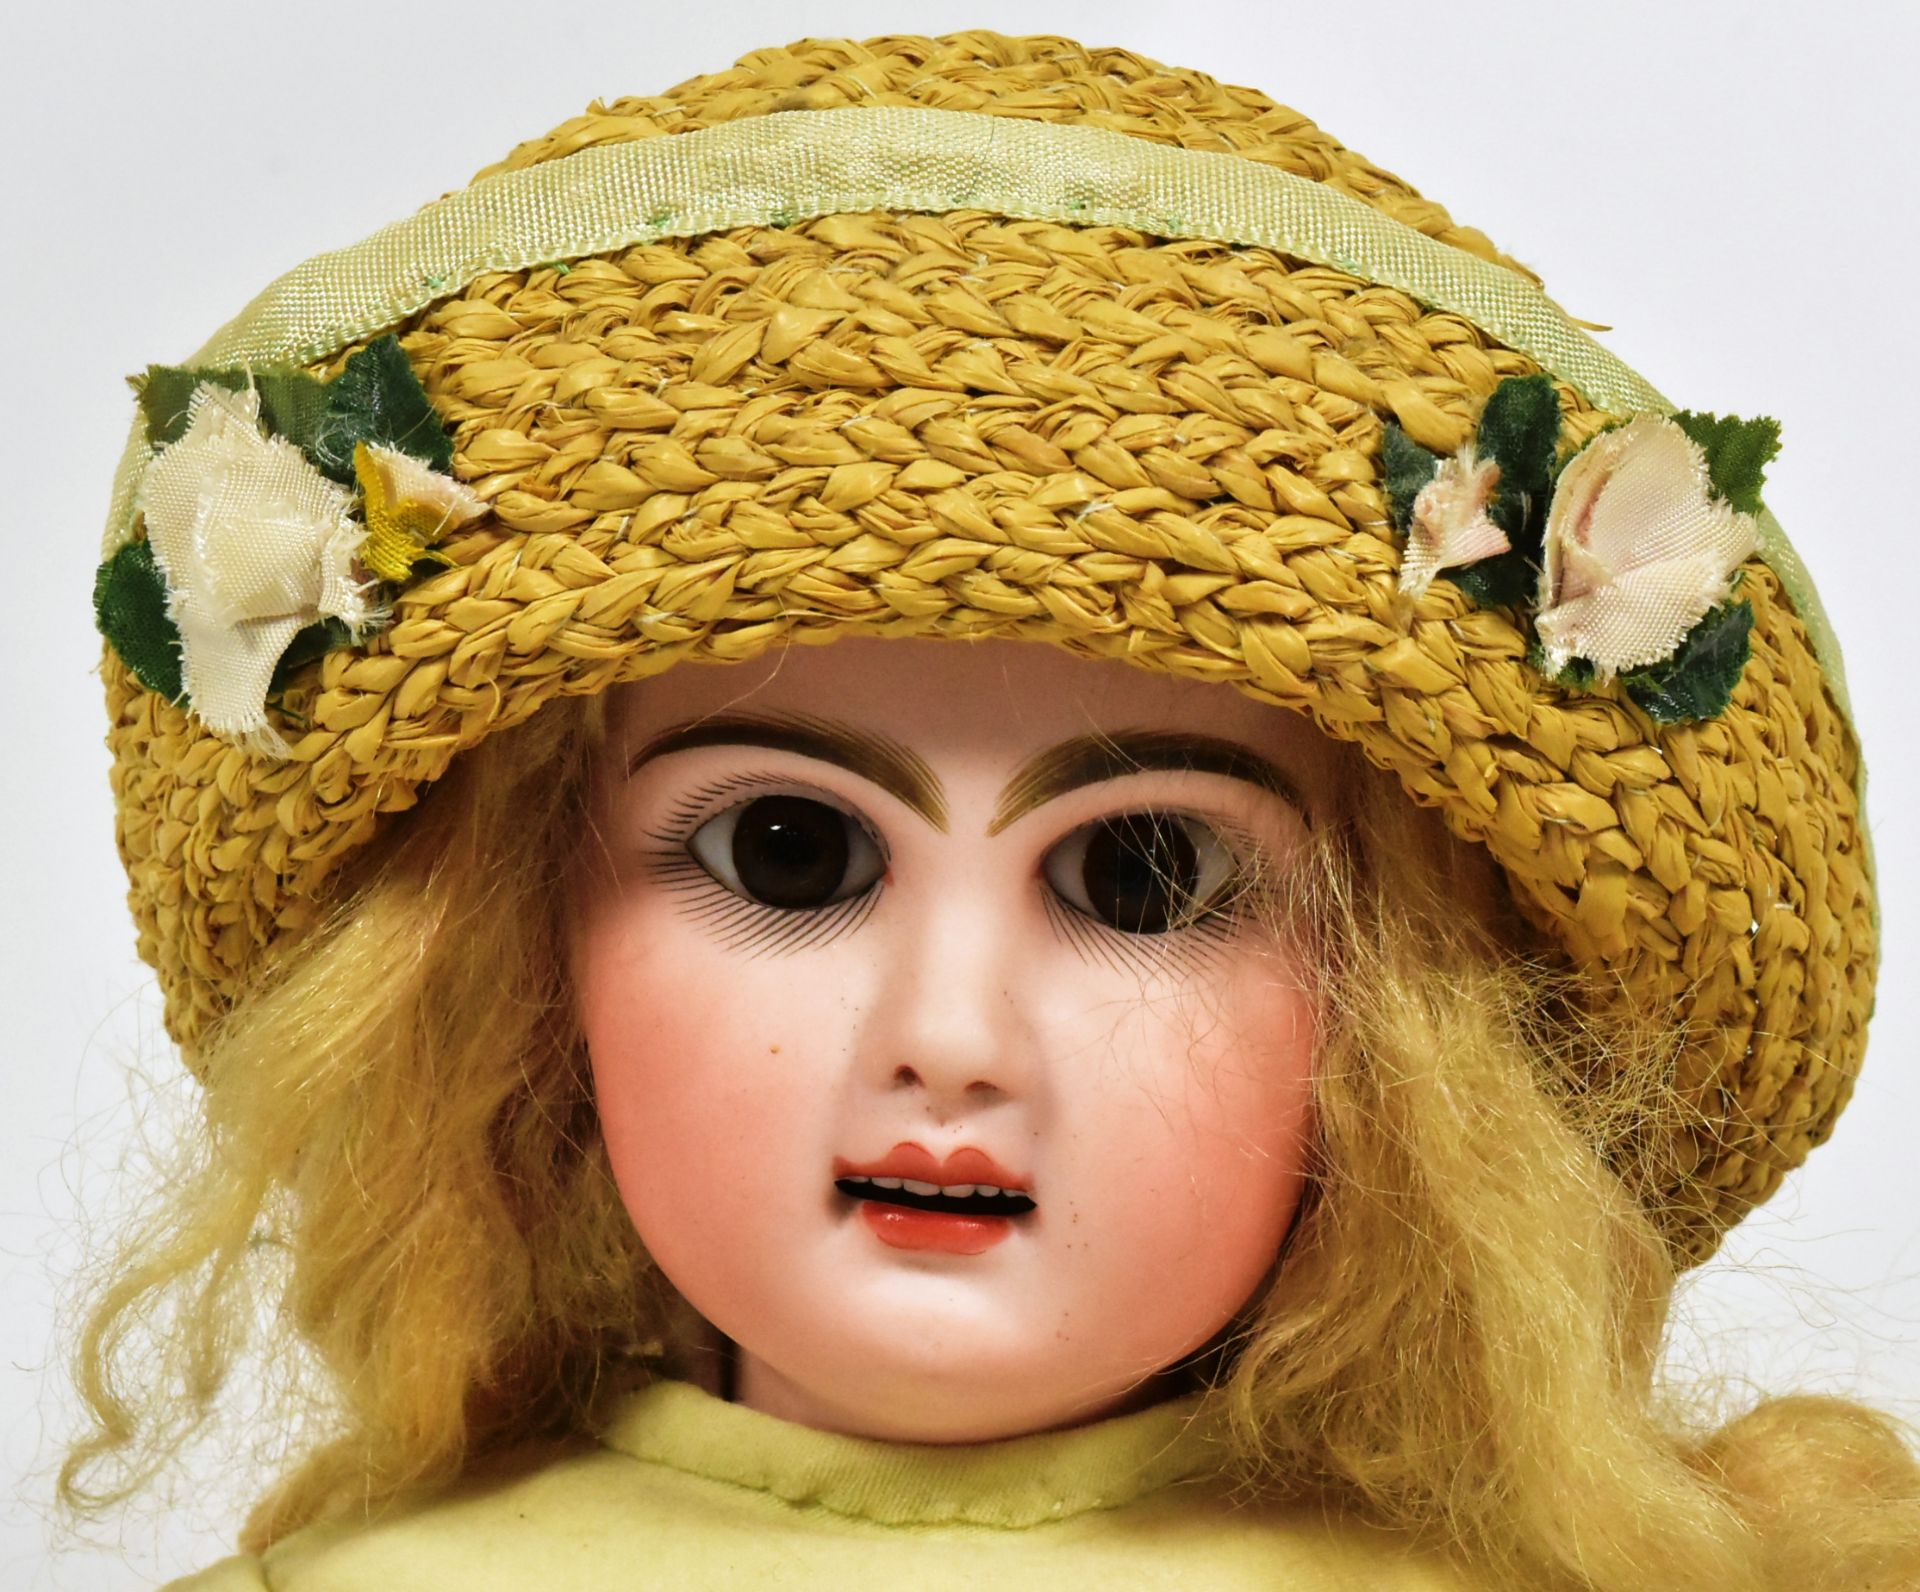 KESTNER - ANTIQUE LATE 19TH CENTURY BISQUE HEADED DOLL - Image 2 of 6